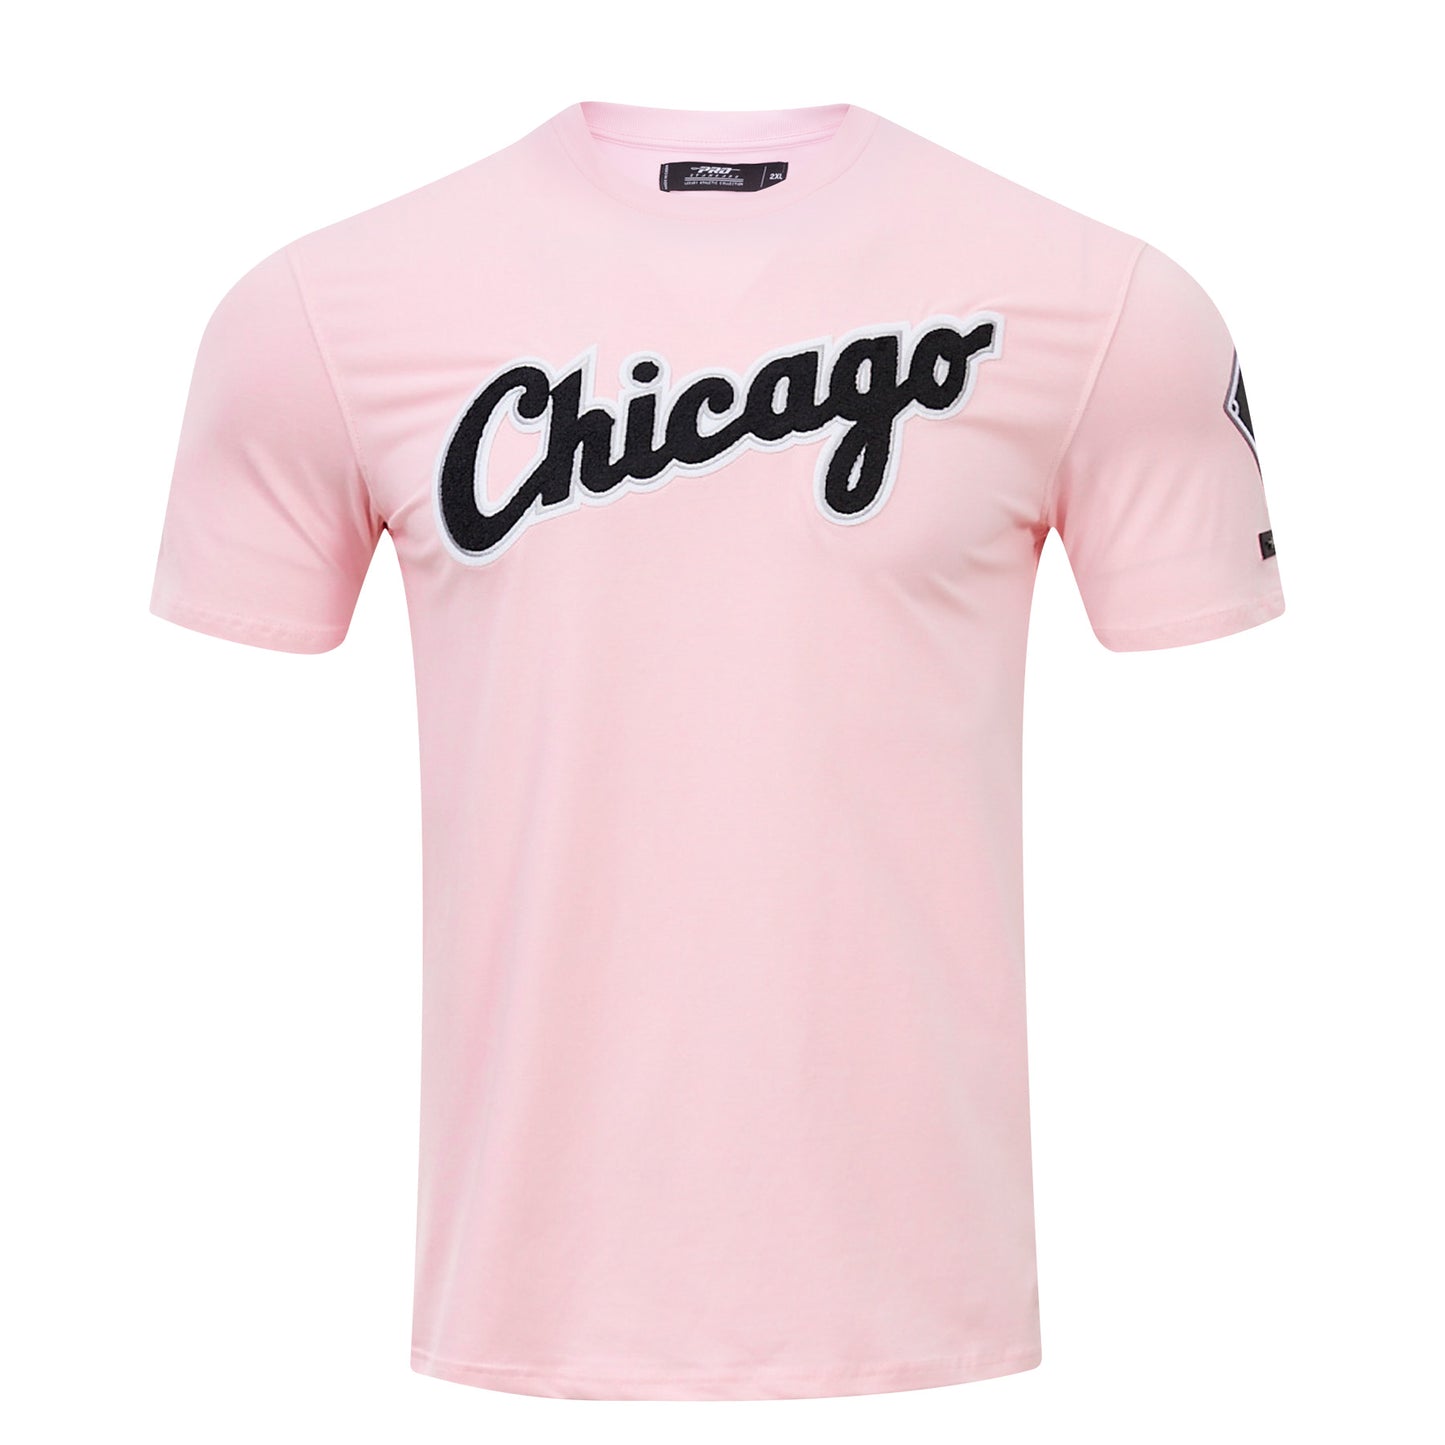 MLB CHICAGO WHITE SOX CLASSIC CHENILLE MEN'S TOP (PINK)